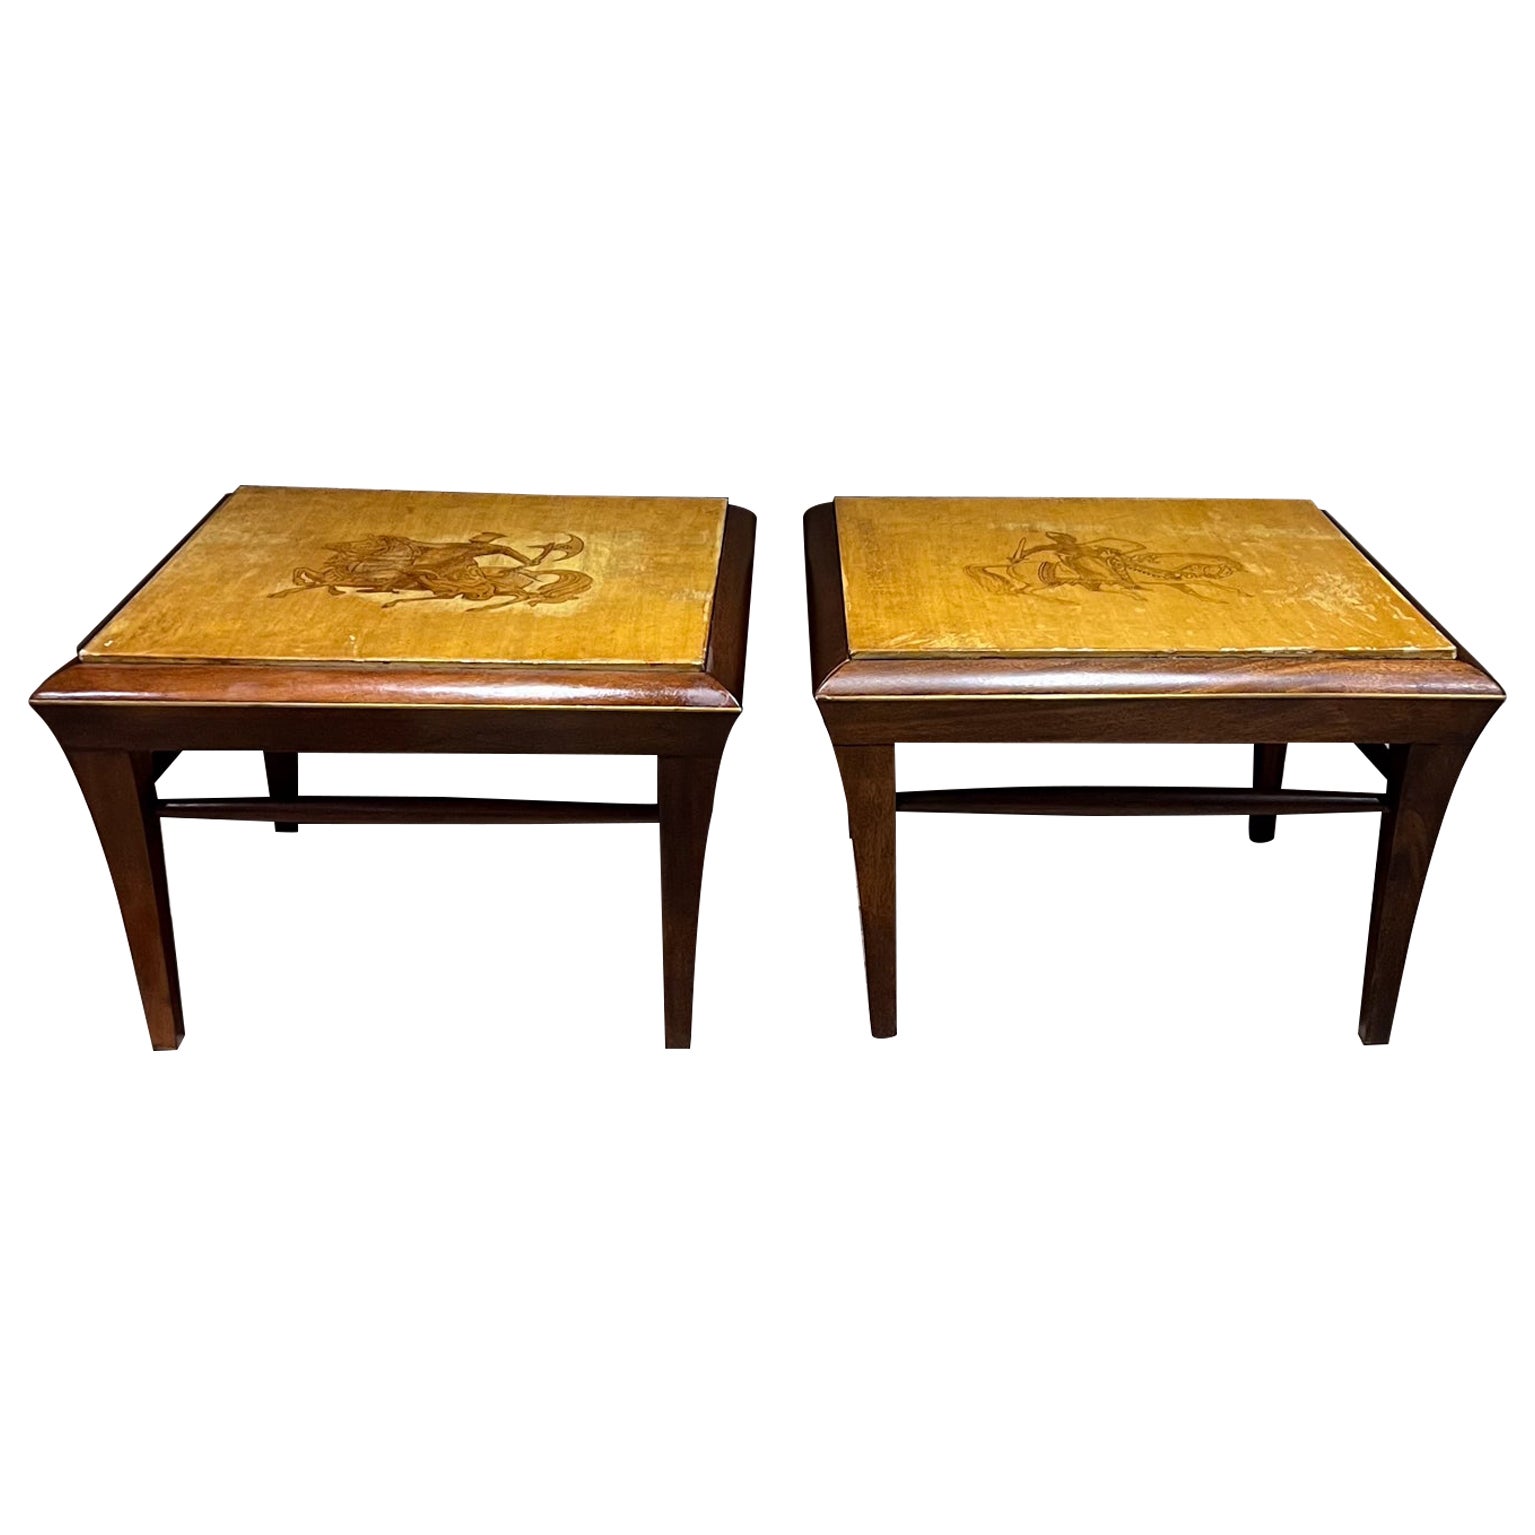 1960s Neoclassical Hand Painted Side Tables Mahogany Goatskin For Sale